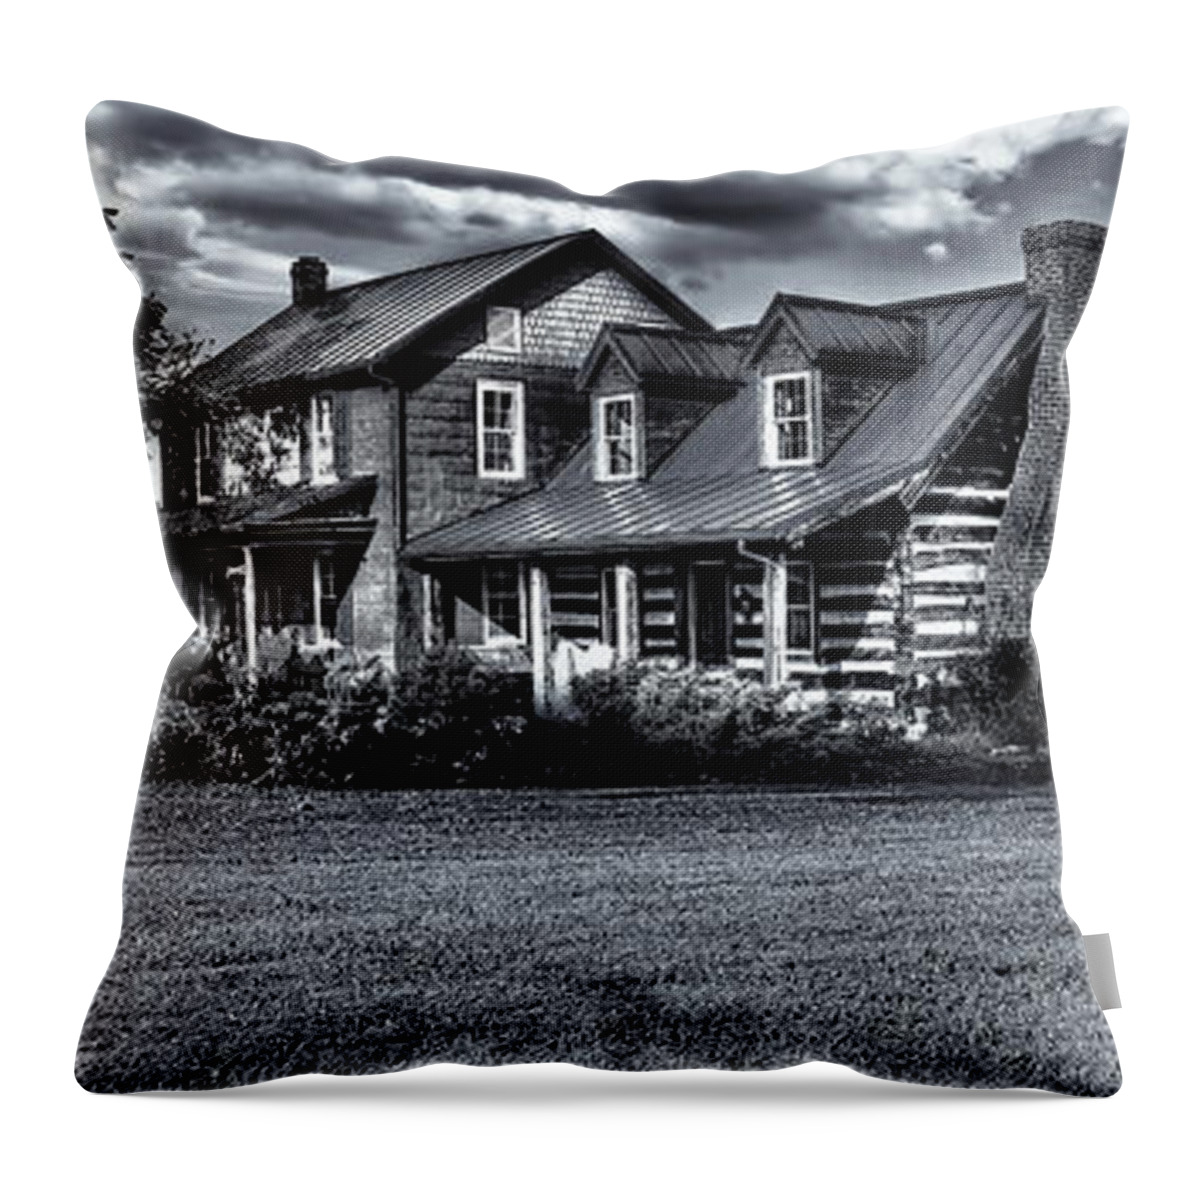 Photograph Throw Pillow featuring the photograph This Farm House by Reynaldo Williams